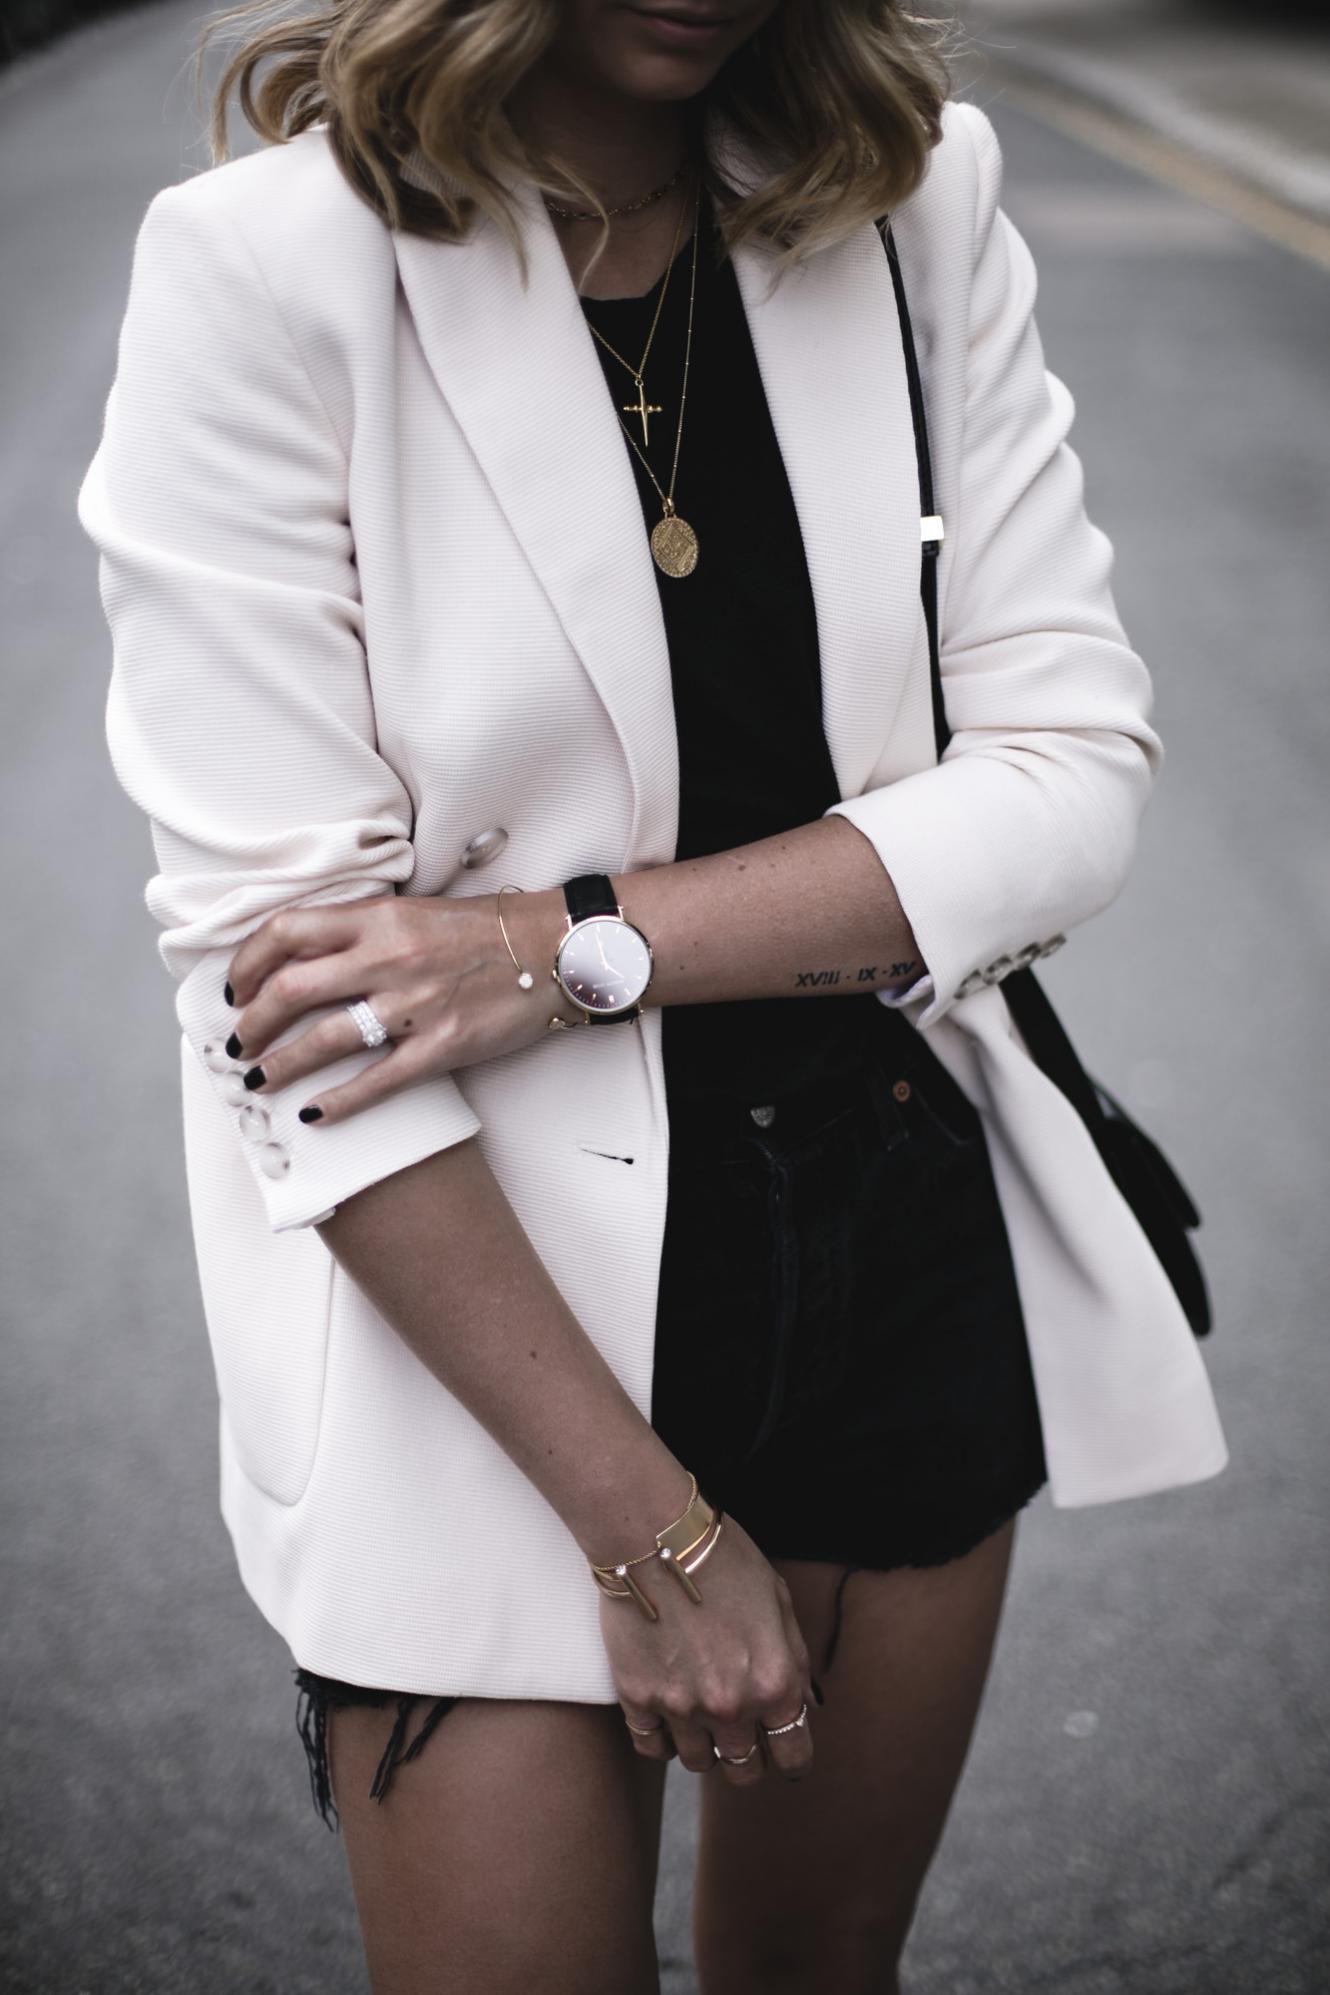 Emma Hill wears cream double breasted blazer, black vintage Levis 501 shorts, black t-shirt, layered gold necklaces, Celine box bag, chic summer outfit